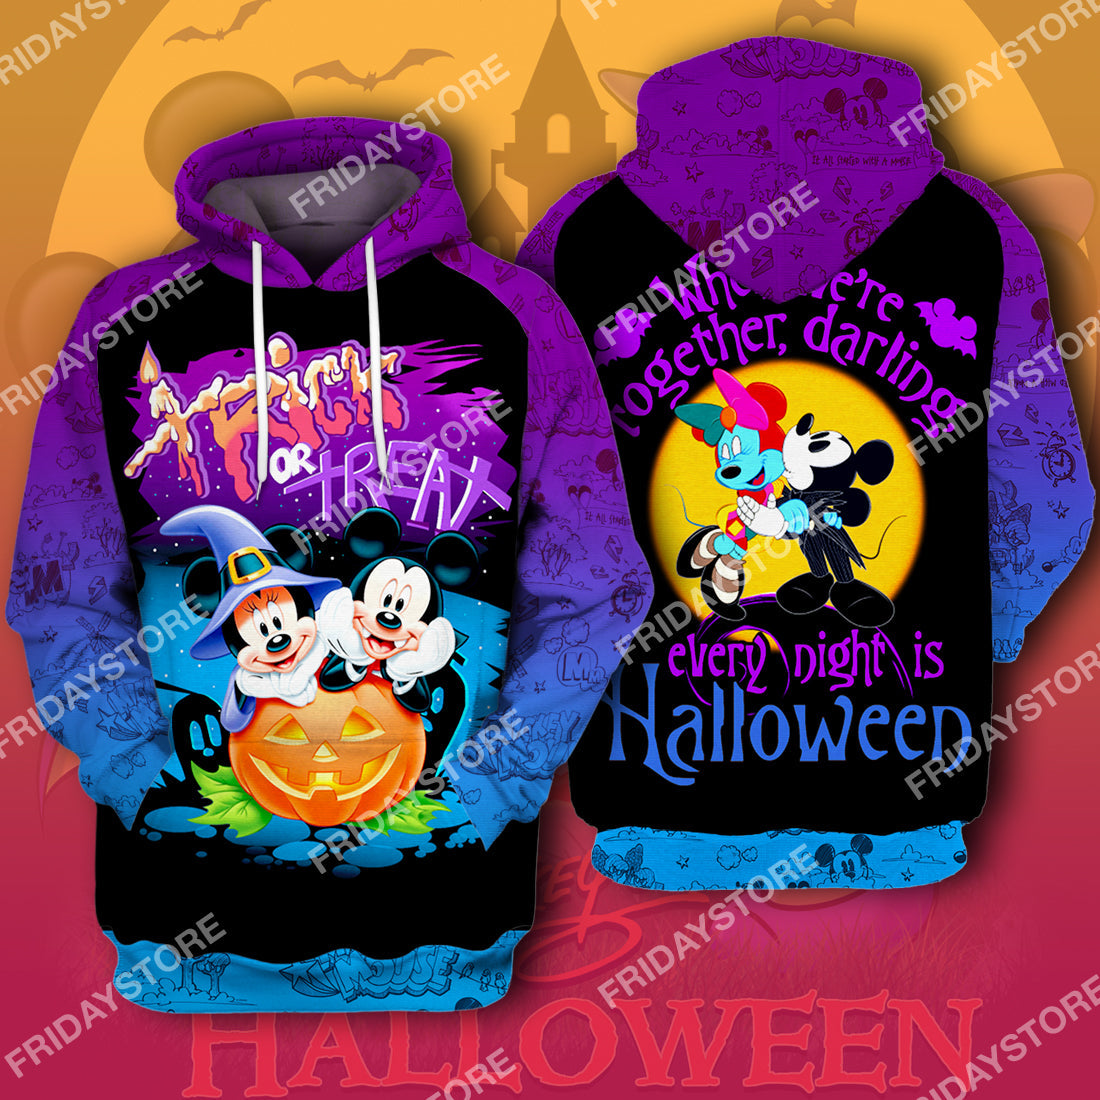 Unifinz DN T-shirt We're Together Darling Every Night Is Halloween T-shirt High Quality DN Mk Mouse Hoodie Sweater Tank 2022